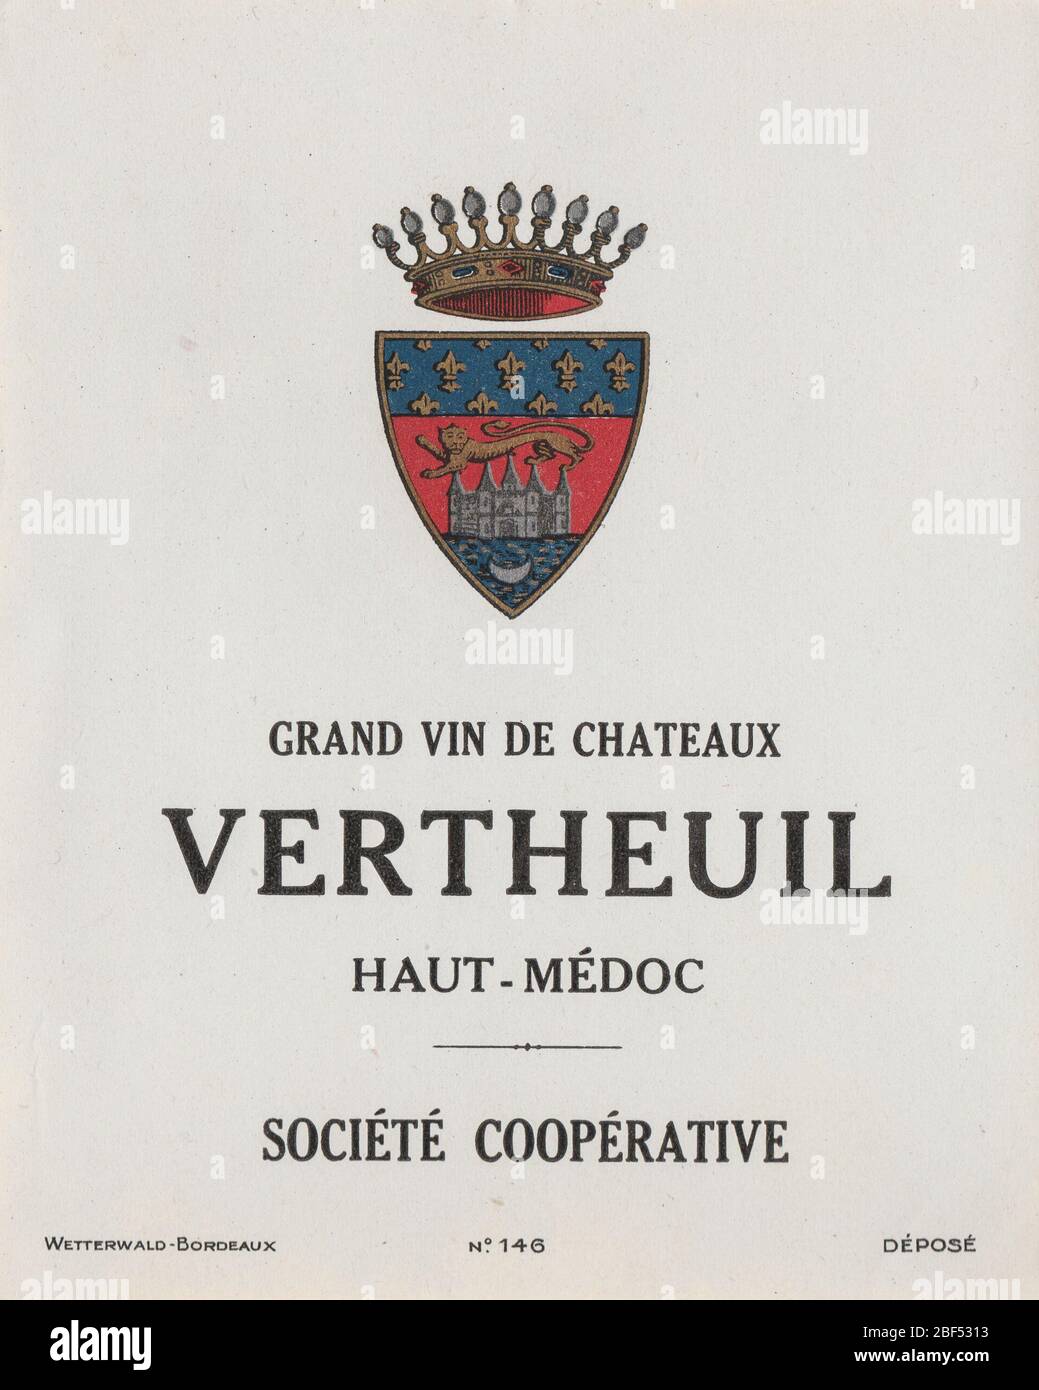 Unused vintage wine label from a Grand Vin de Chateaux Vertheuil in the Haut-Médoc region, France Stock Photo